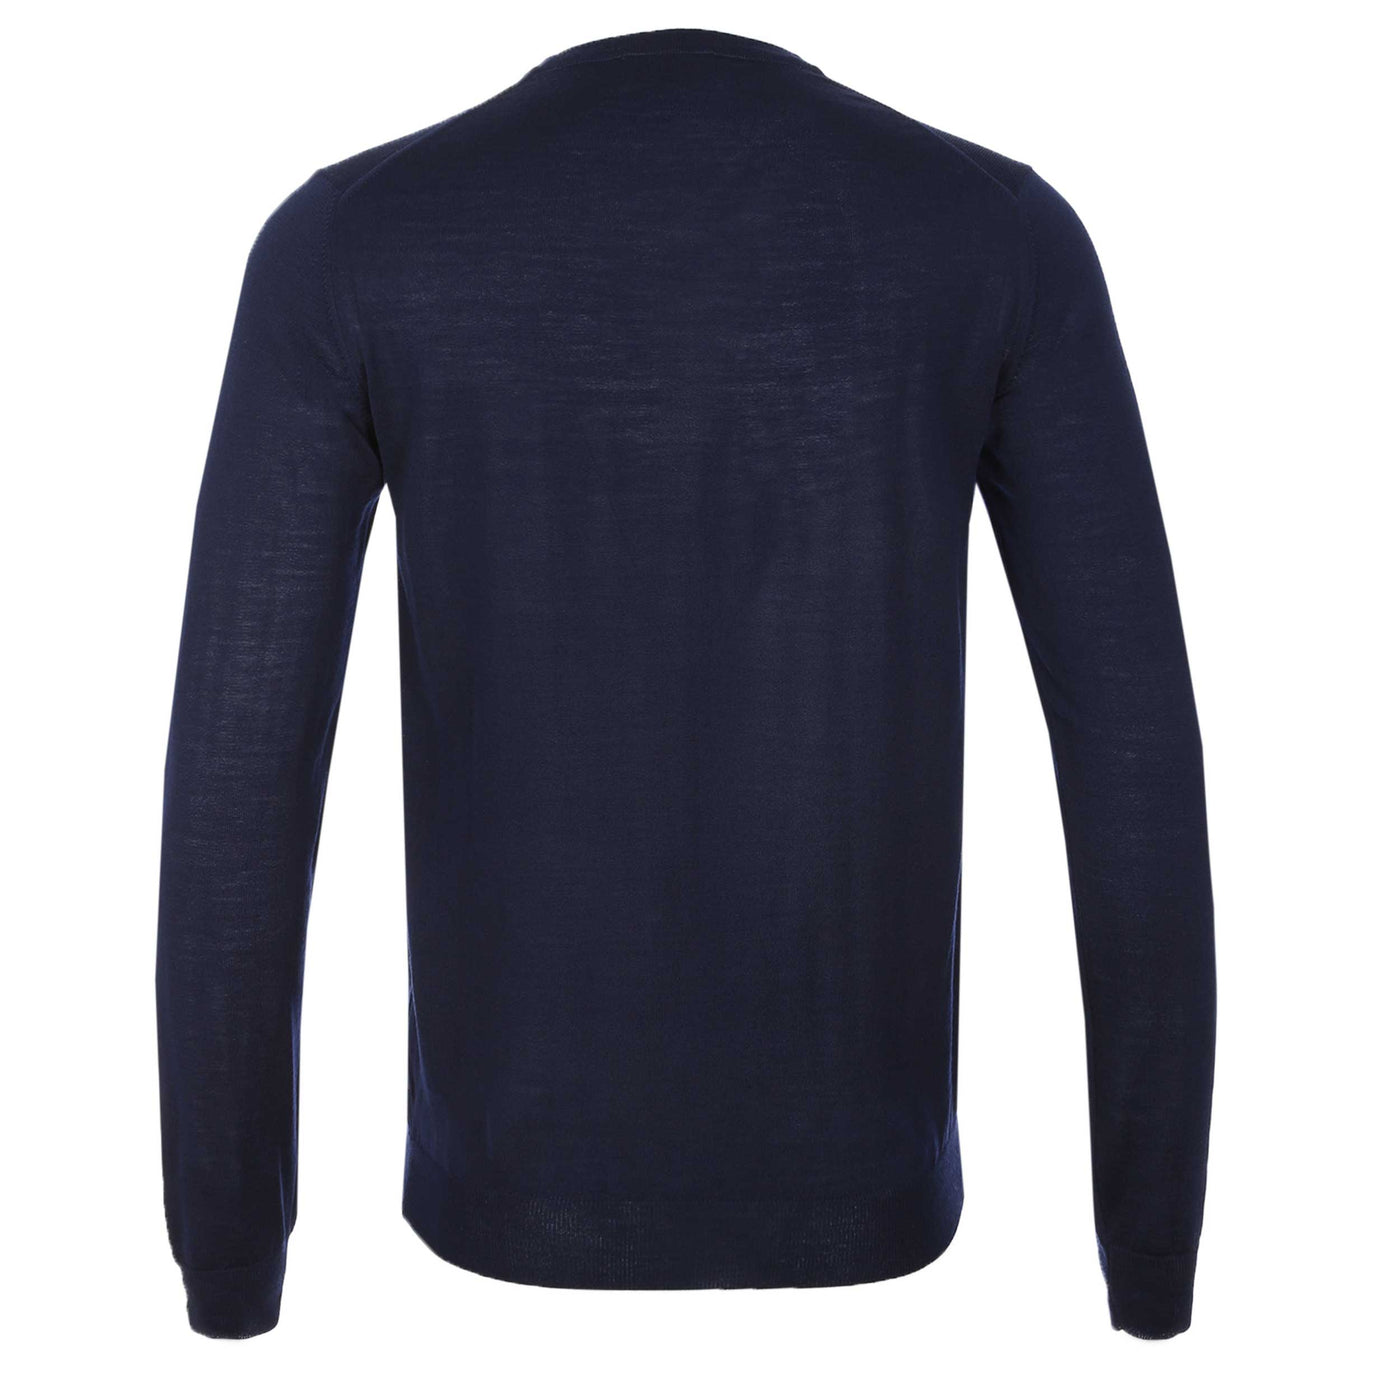 Oliver Sweeney Camber Knitwear in Navy Back